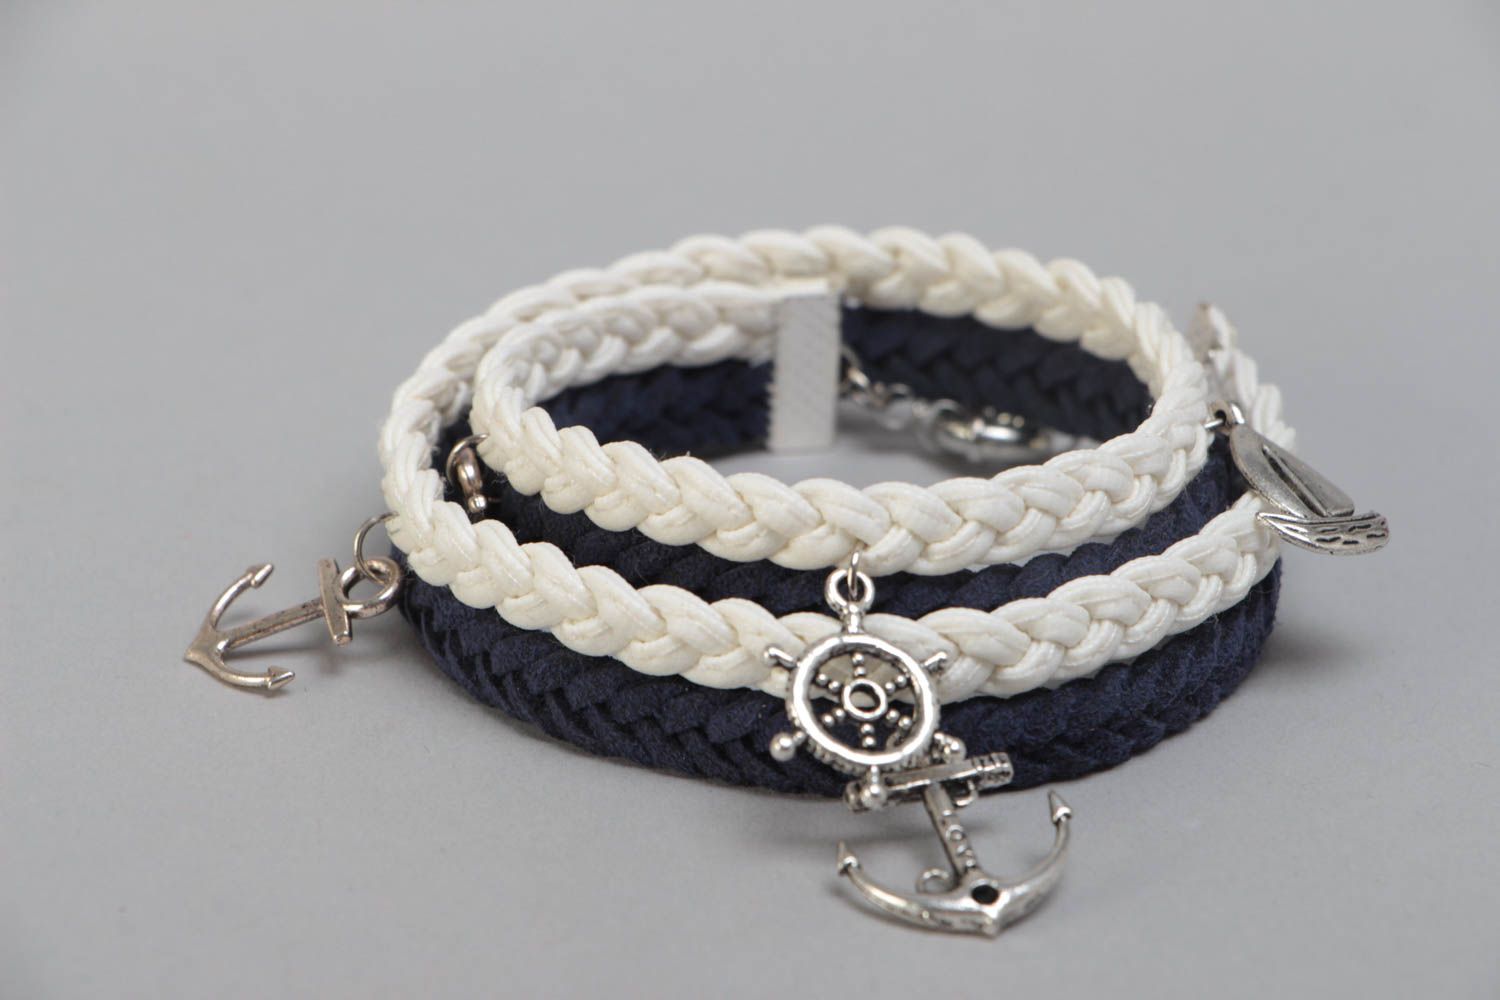 Handmade multi row wrist bracelet woven of suede cord in marine style with charm photo 3